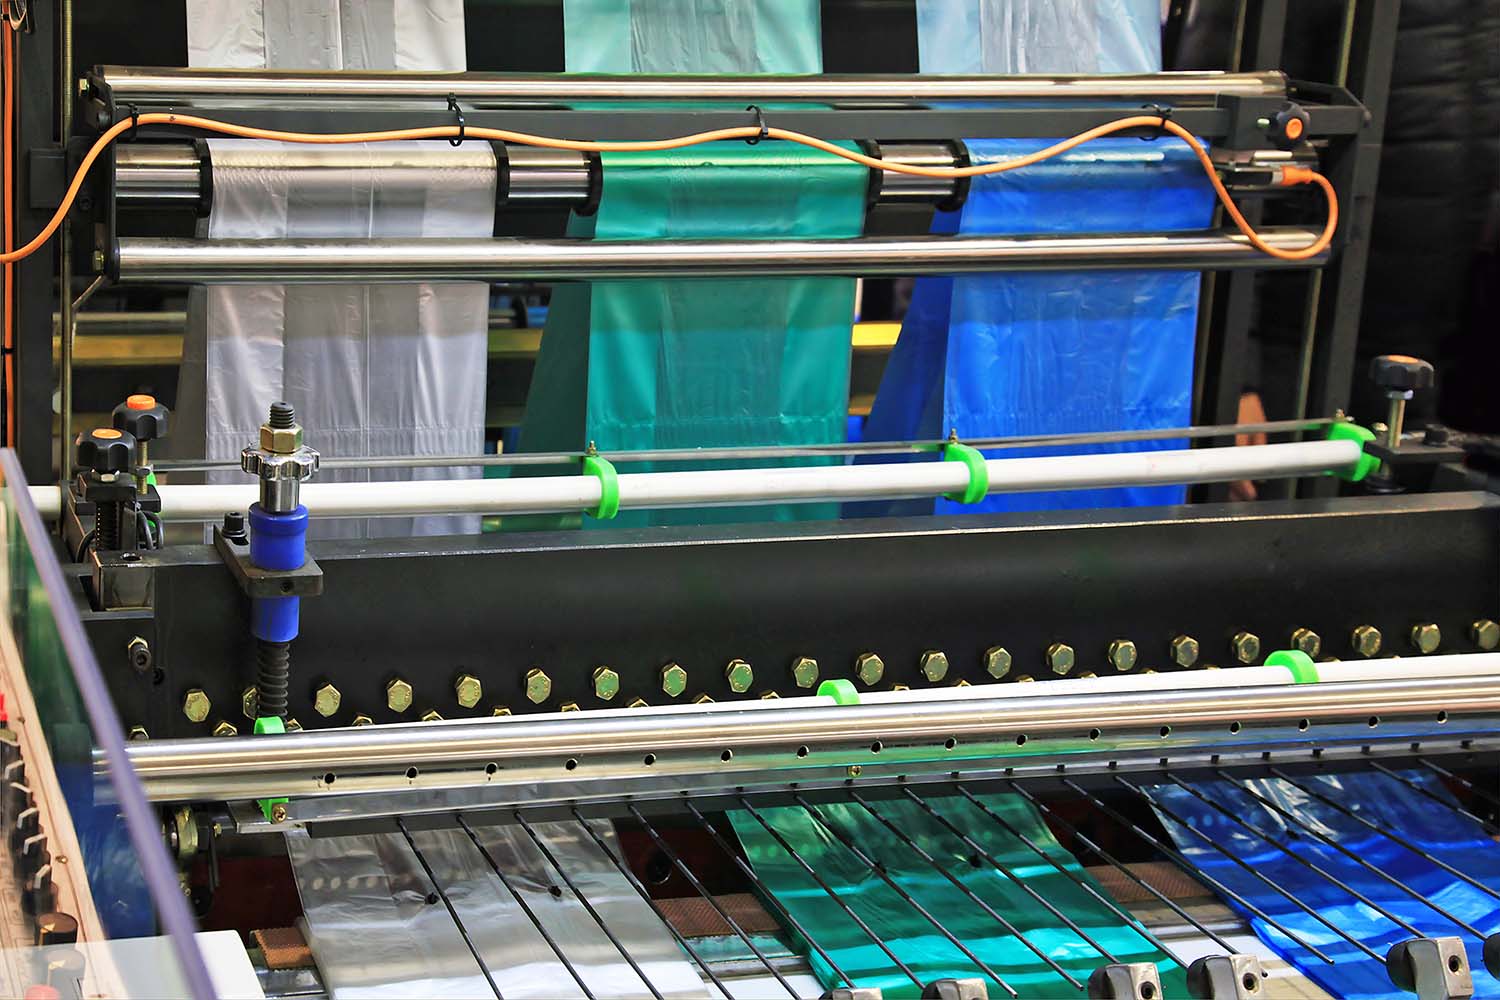 rolls of multiple colored plastic bags on a production machine at a plastic manufacturing company representing the chemical & plastics industries